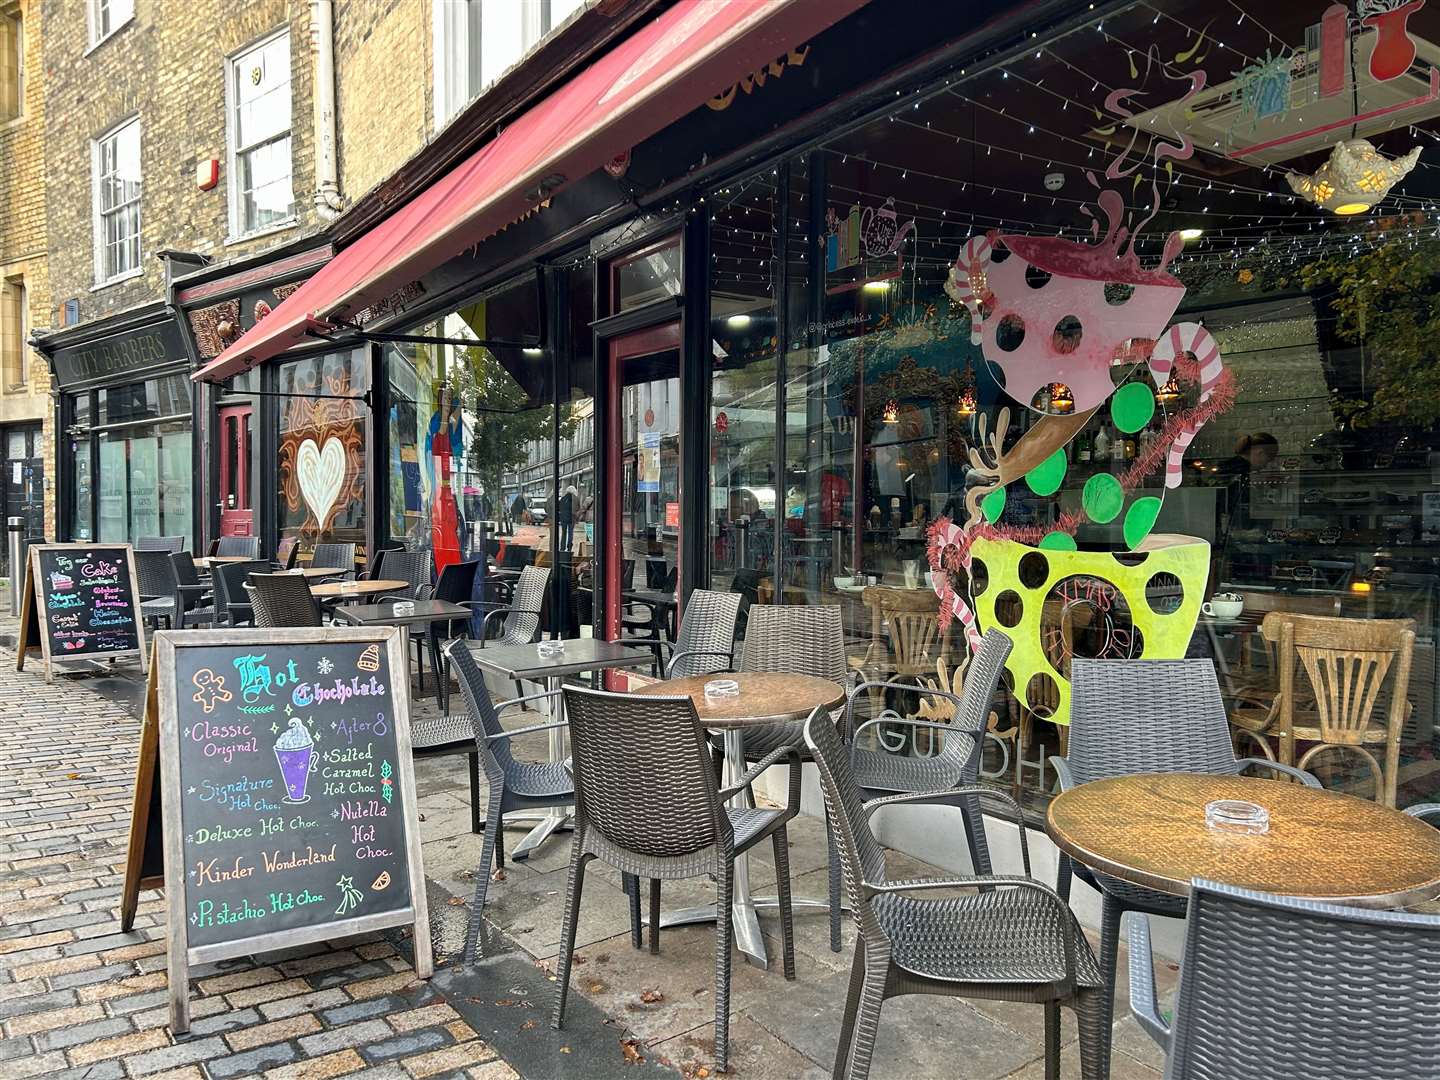 Staff at Eleto Chocolate Cafe in Guildhall Street, Canterbury were found not to be washing their hands between tasks